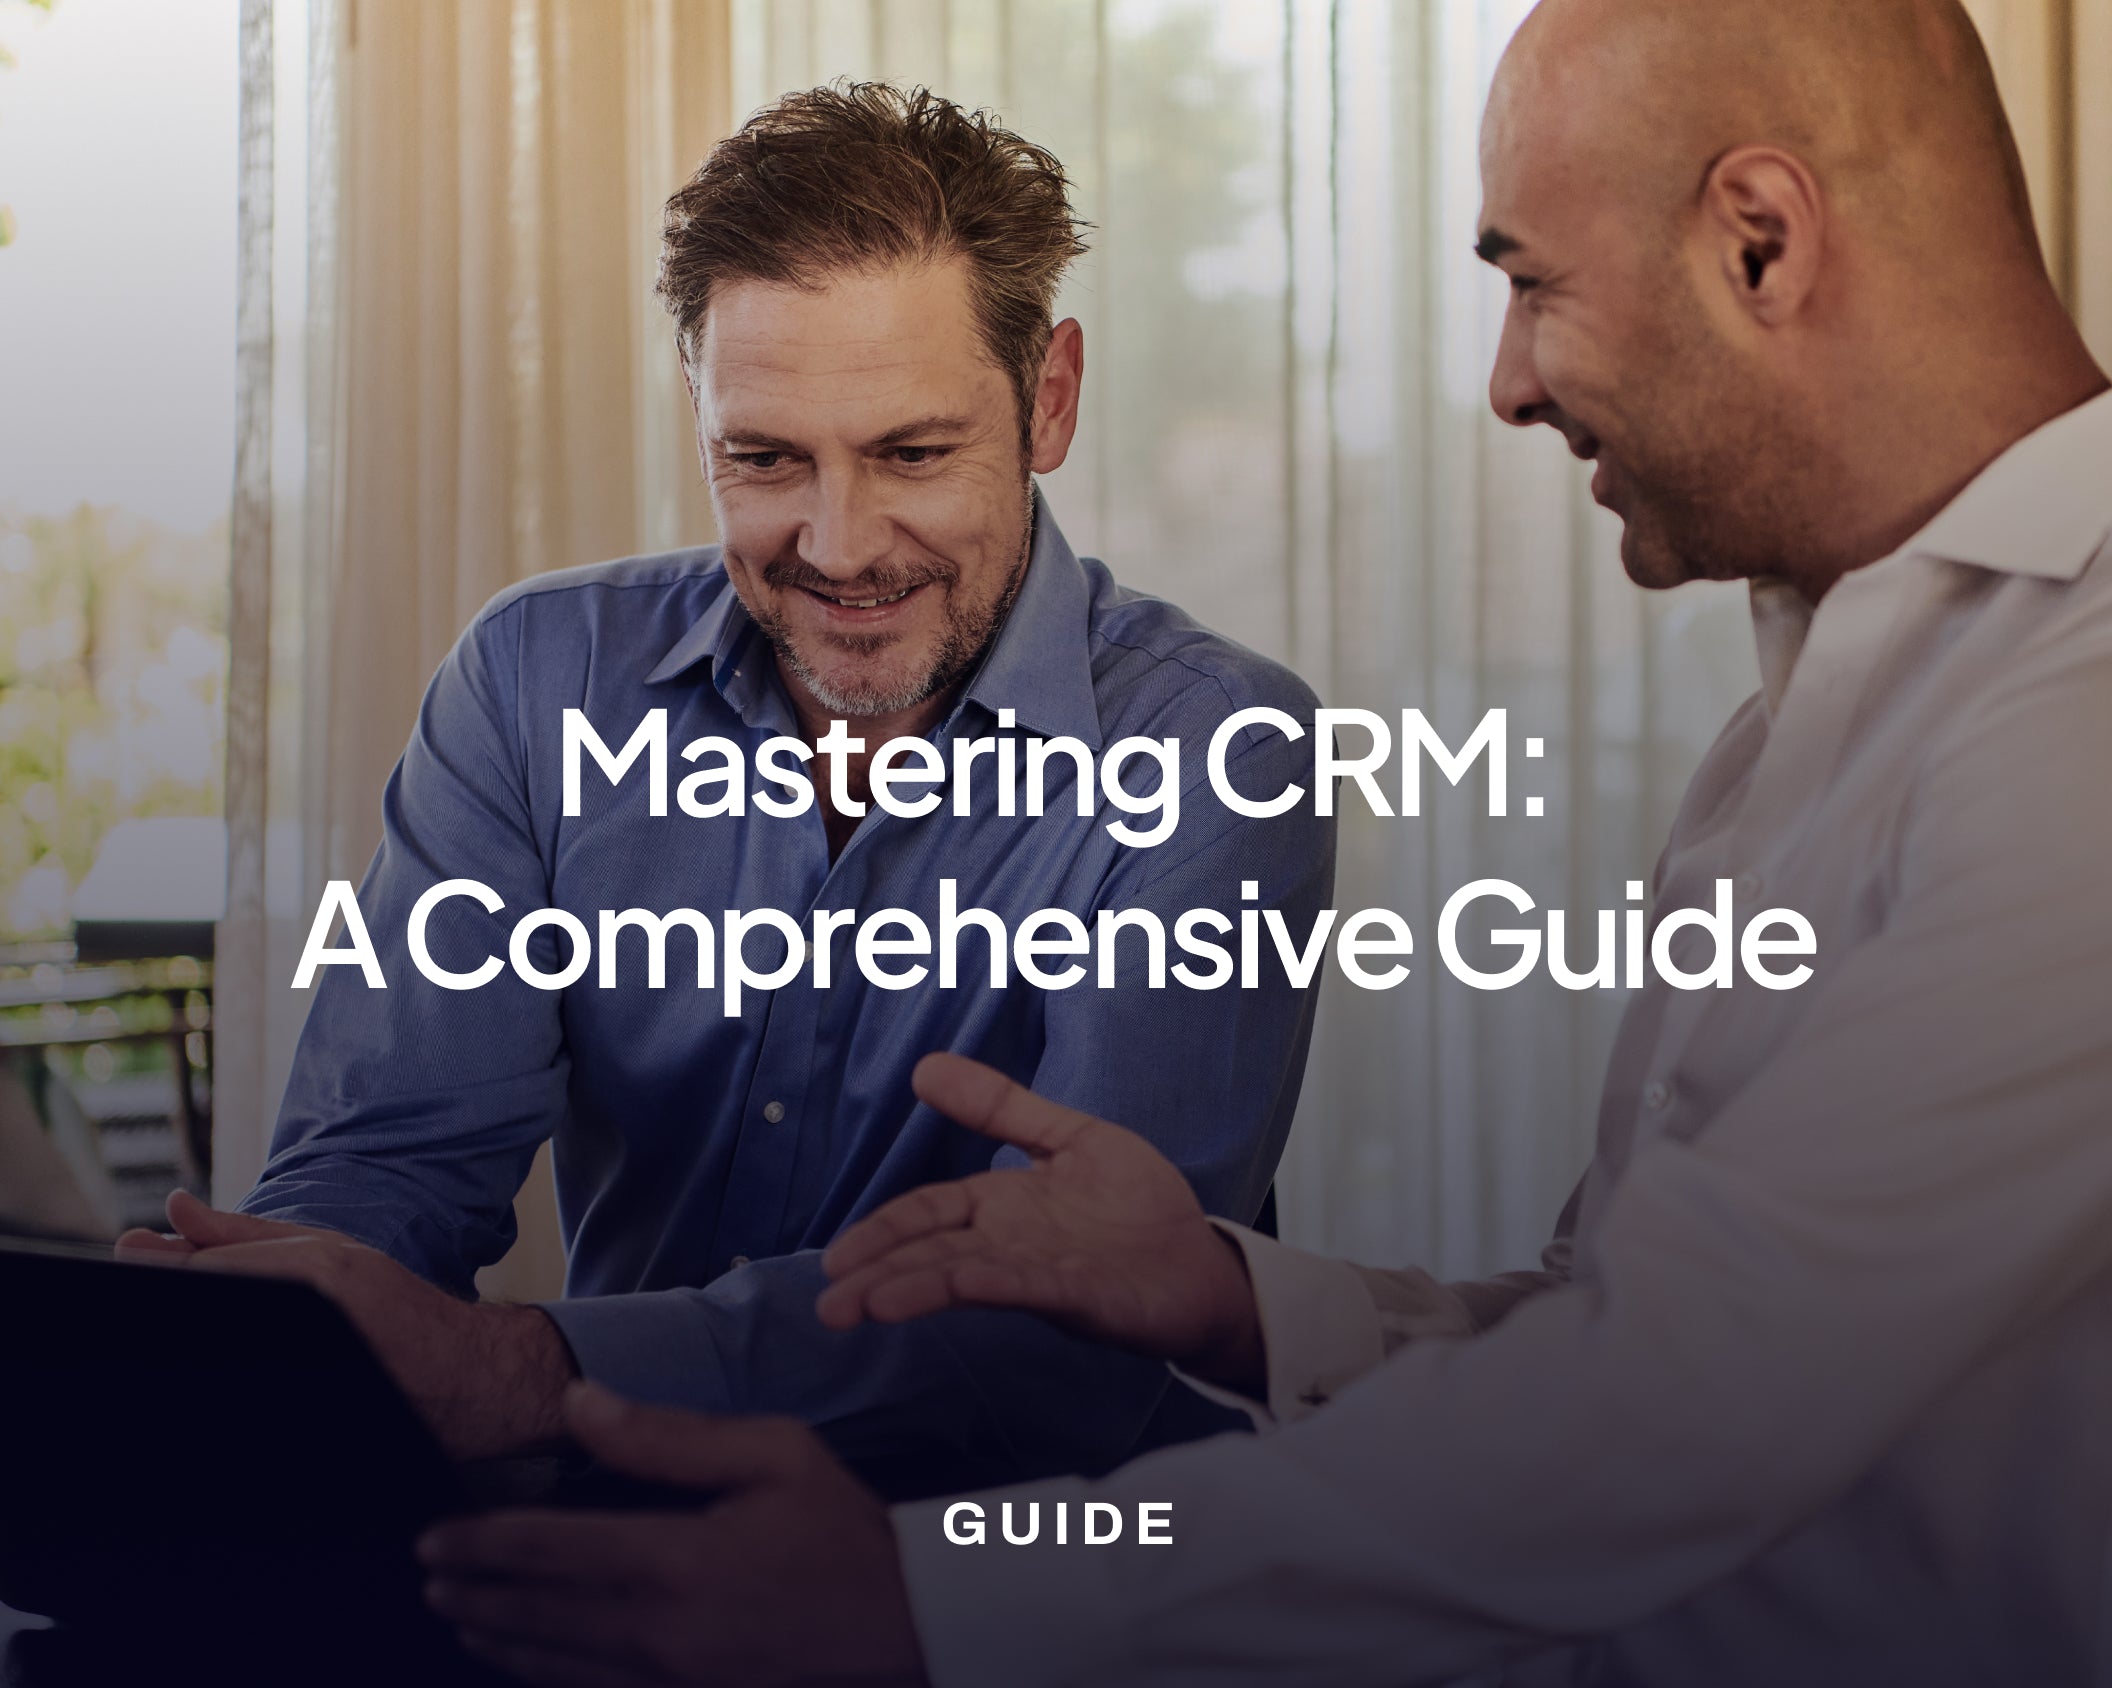 Mastering CRM: A Comprehensive Guide